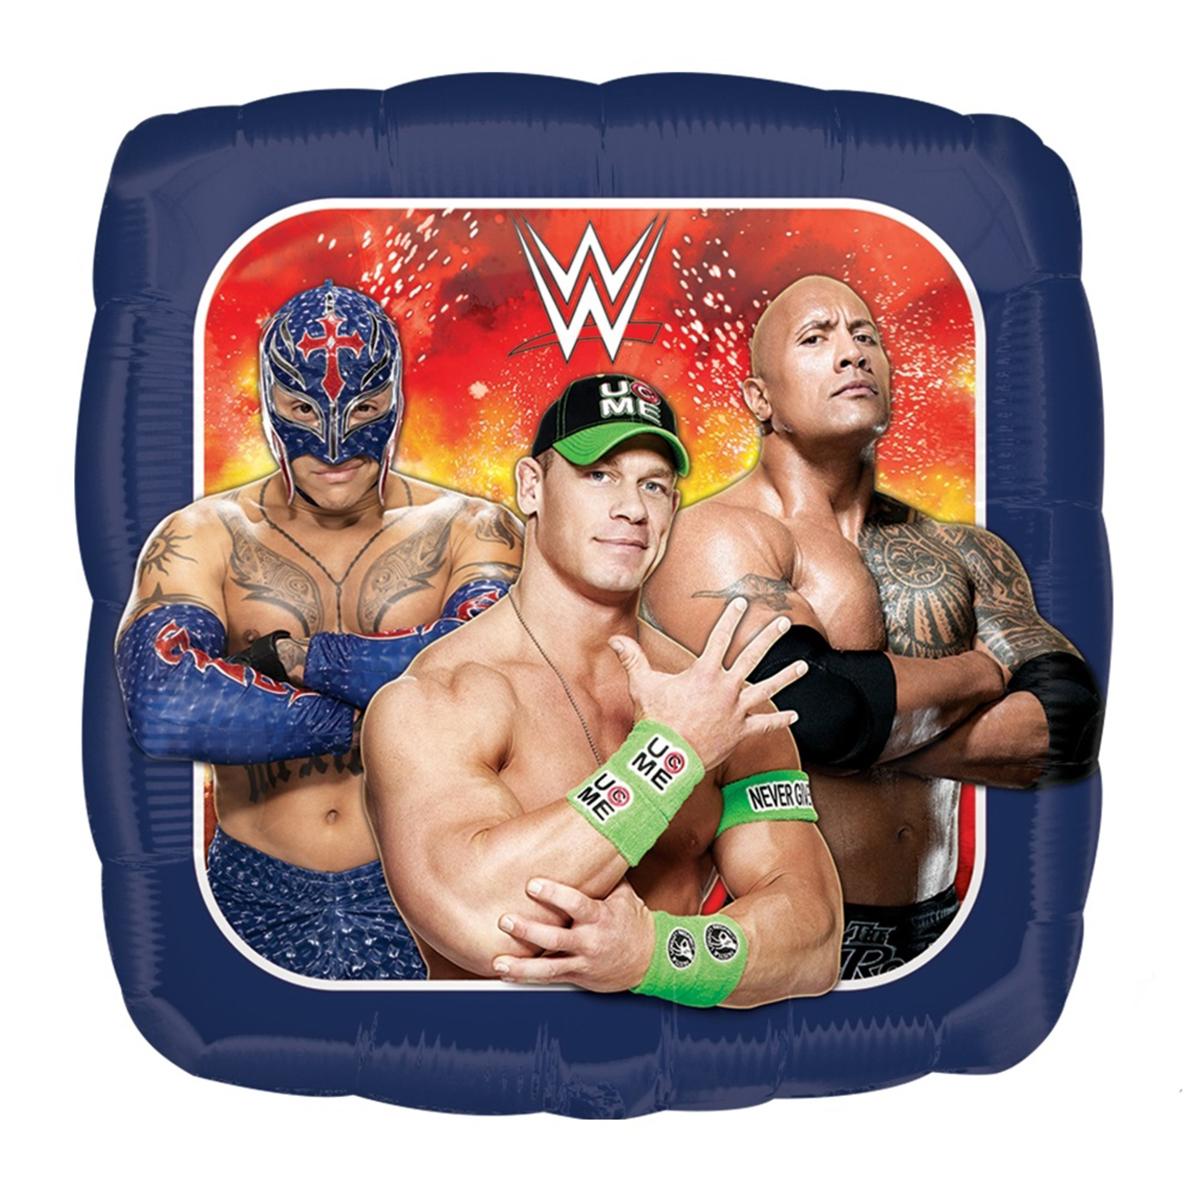 WWE Group Square Foil Balloon 18in Balloons & Streamers - Party Centre - Party Centre